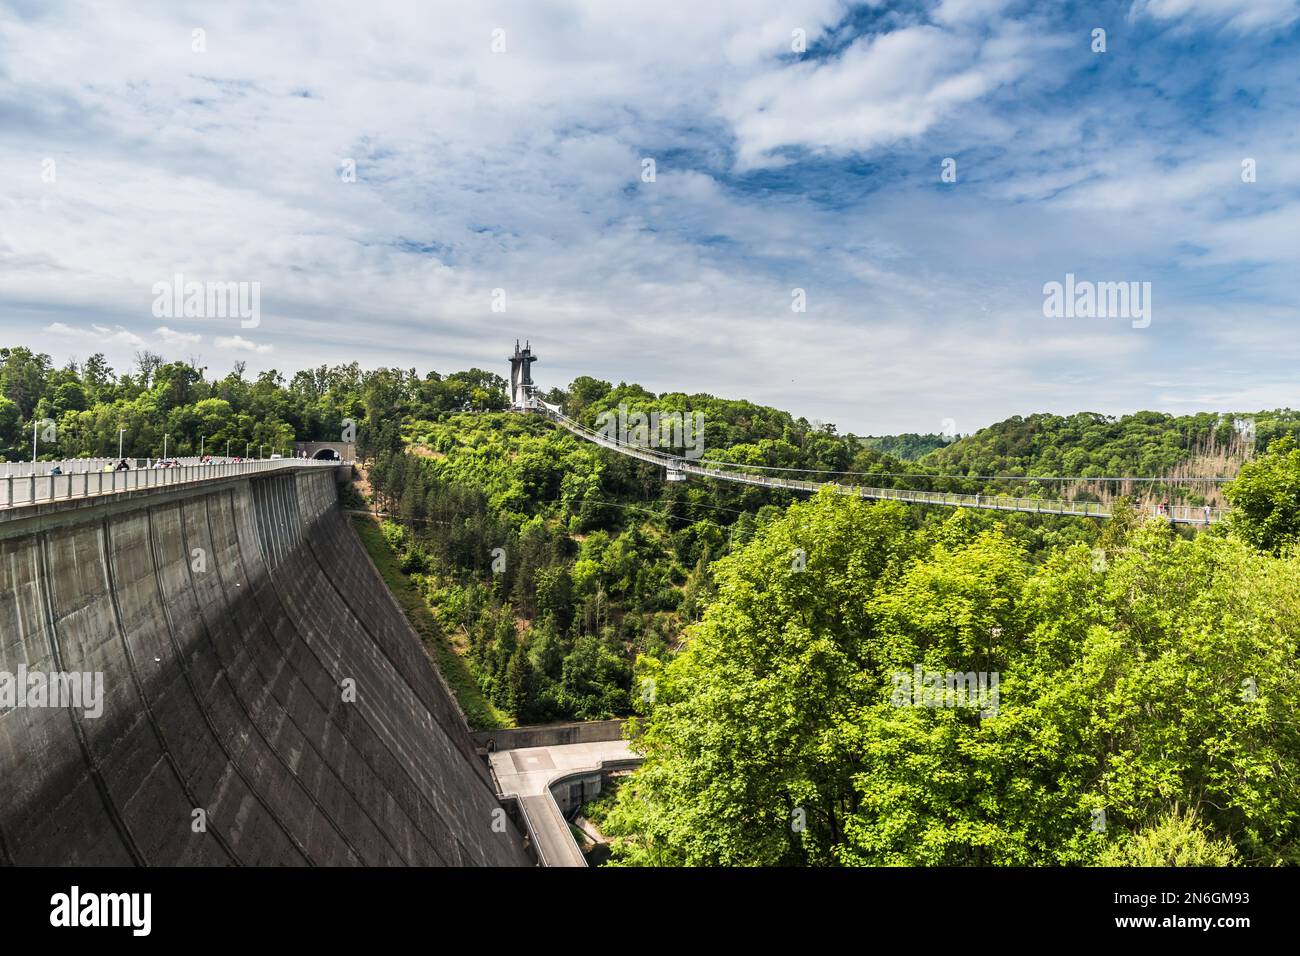 Titan RT rope suspension bridge over the Rappbodetalsperre (rappbode dam) in the Harz Mountains in Germany. Stock Photo